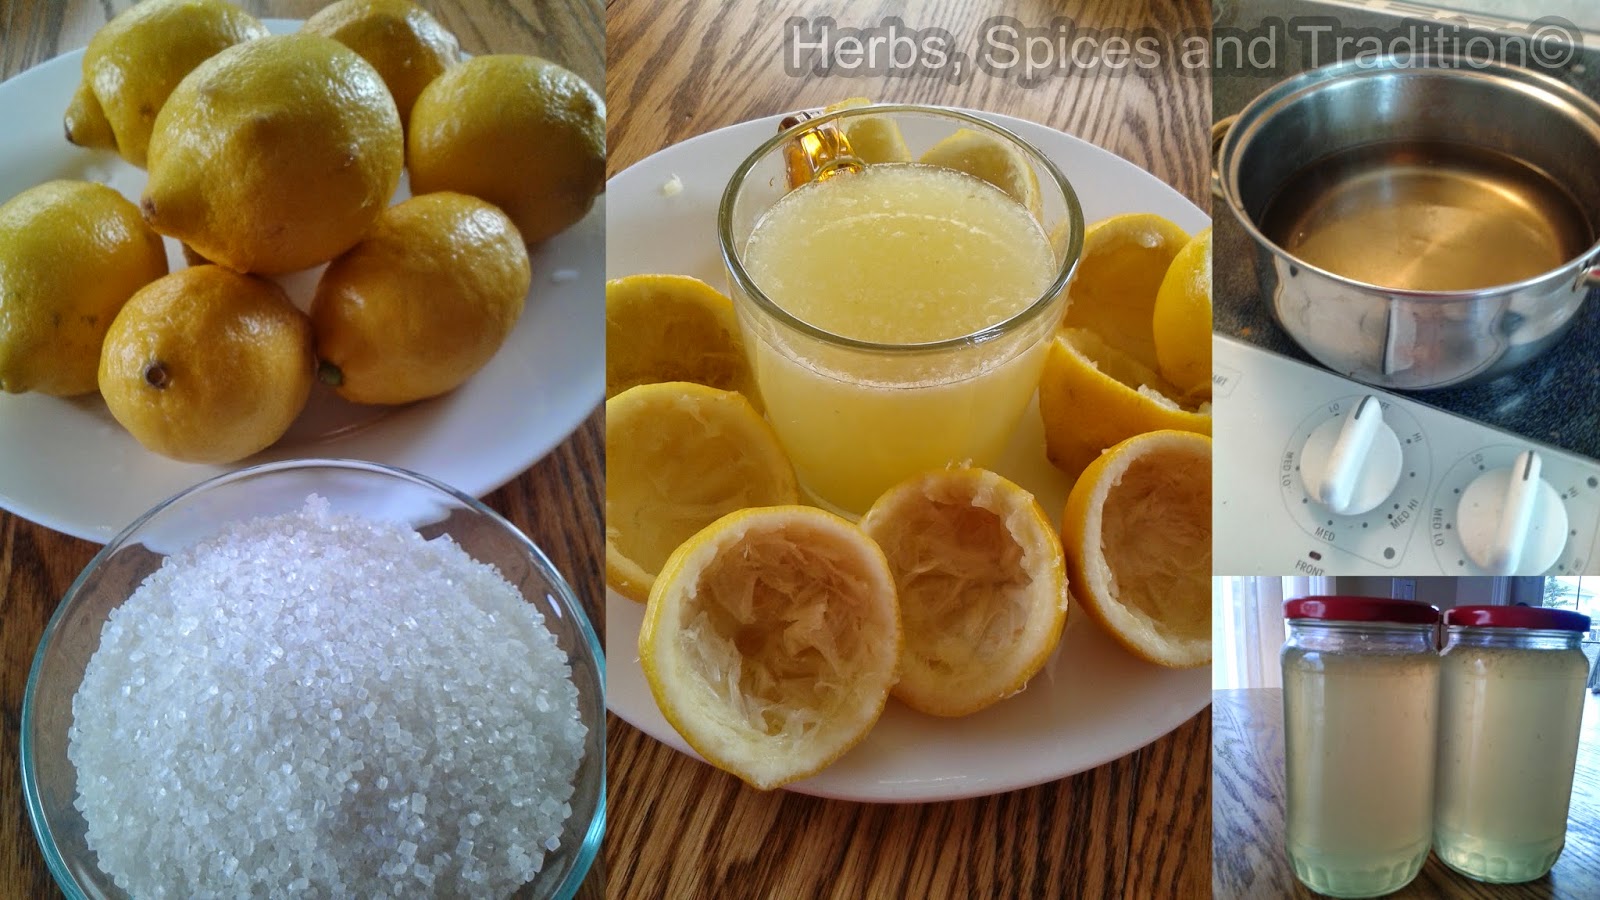 Herbs, Spices and Tradition: HOMEMADE LEMONADE